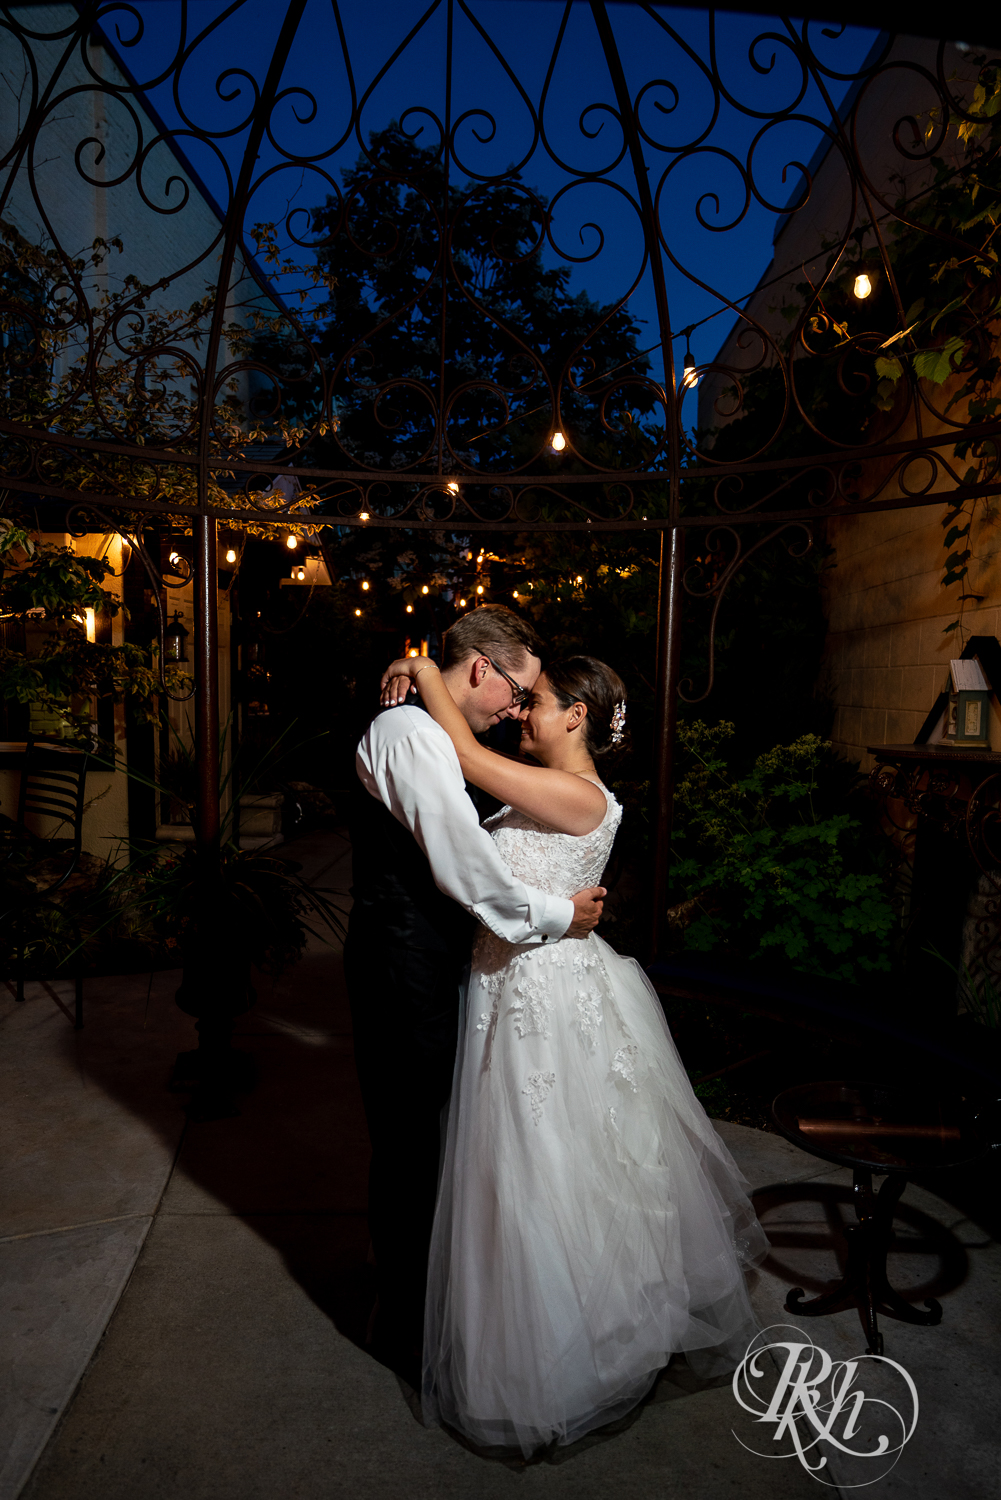 Bride and groom kiss outside at night at Kellerman's Event Center in White Bear Lake, Minnesota.